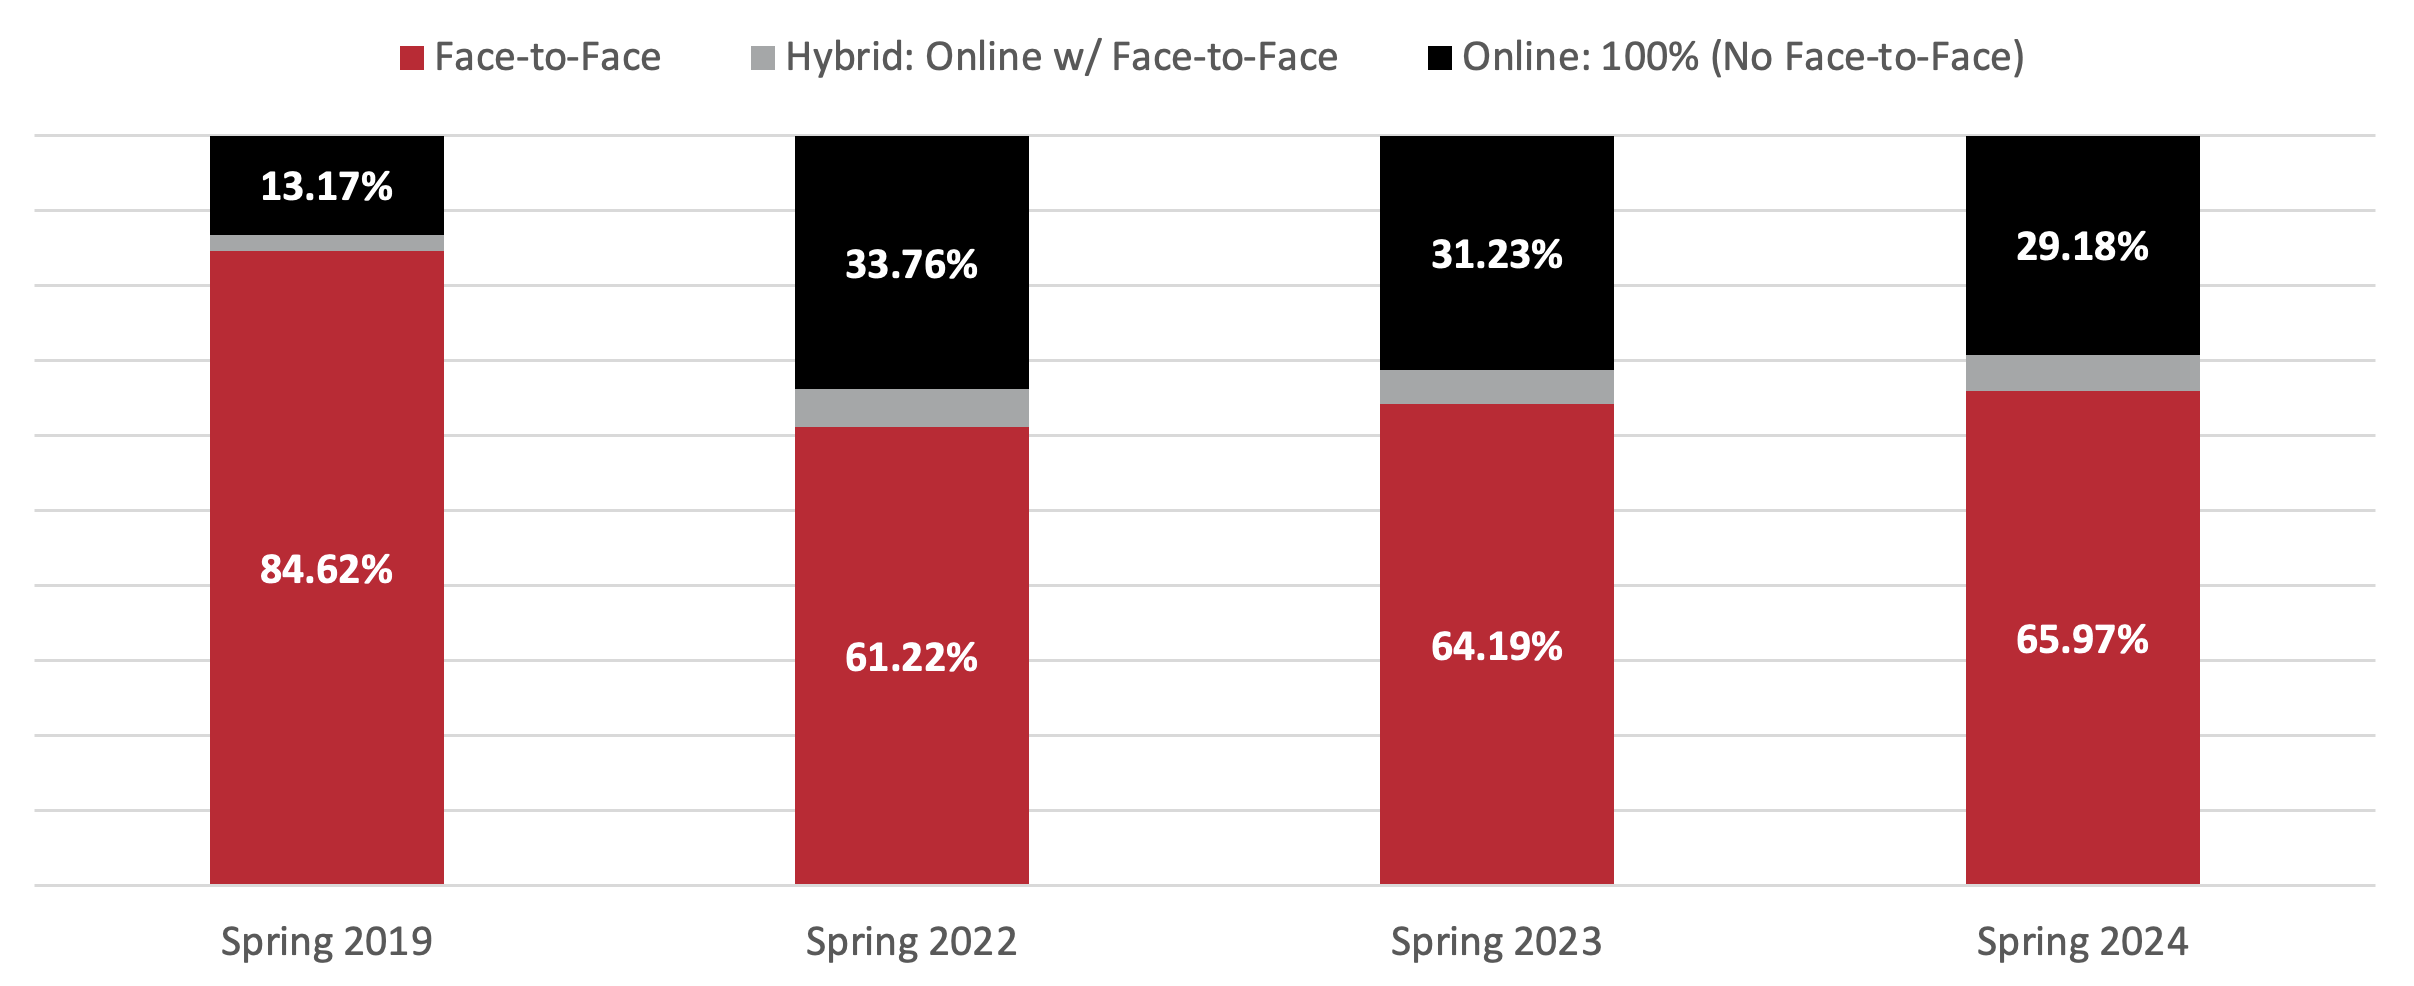 chart showing SCH by term and instruction mode; Spring 2019: 84.62% Face-to-Face, 13.17% Online; Spring 2022 61.22% Face-to-Face, 33.76% Online; Spring 2023: 64.19% Face-to-Face, 31.23% Online; Spring 2024: 65.97% Face-to-Face, 29.18% Online